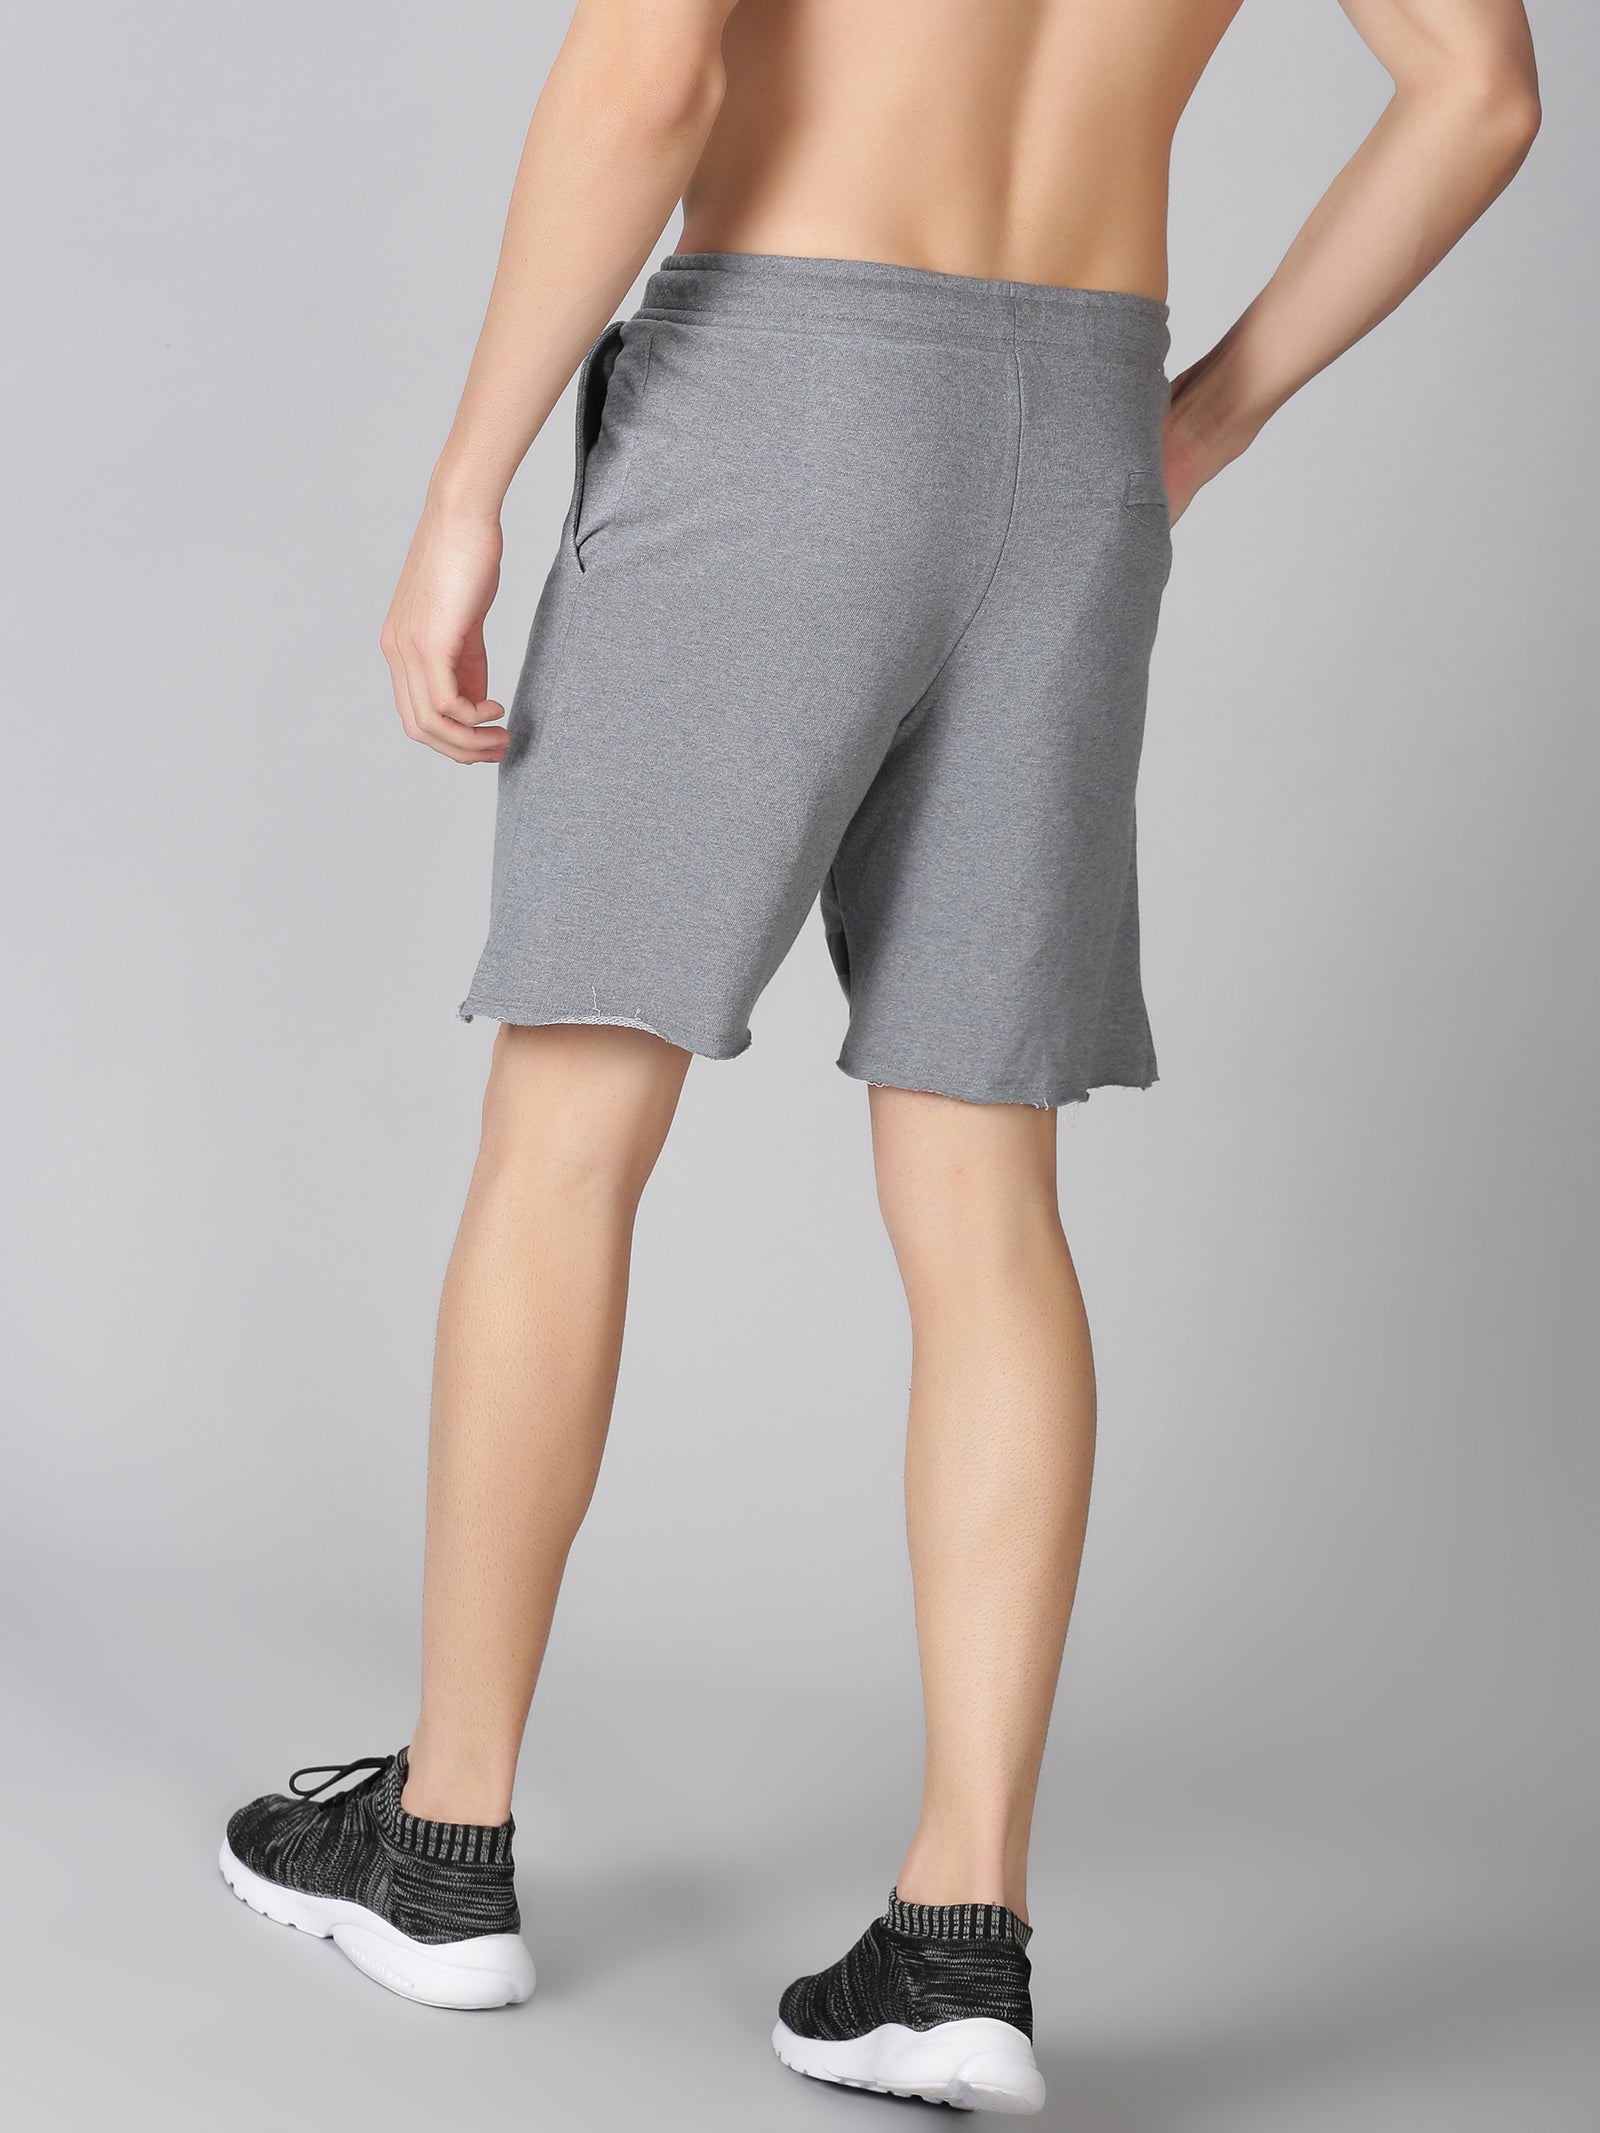 Dares Only Rudiments Classic Grey shorts